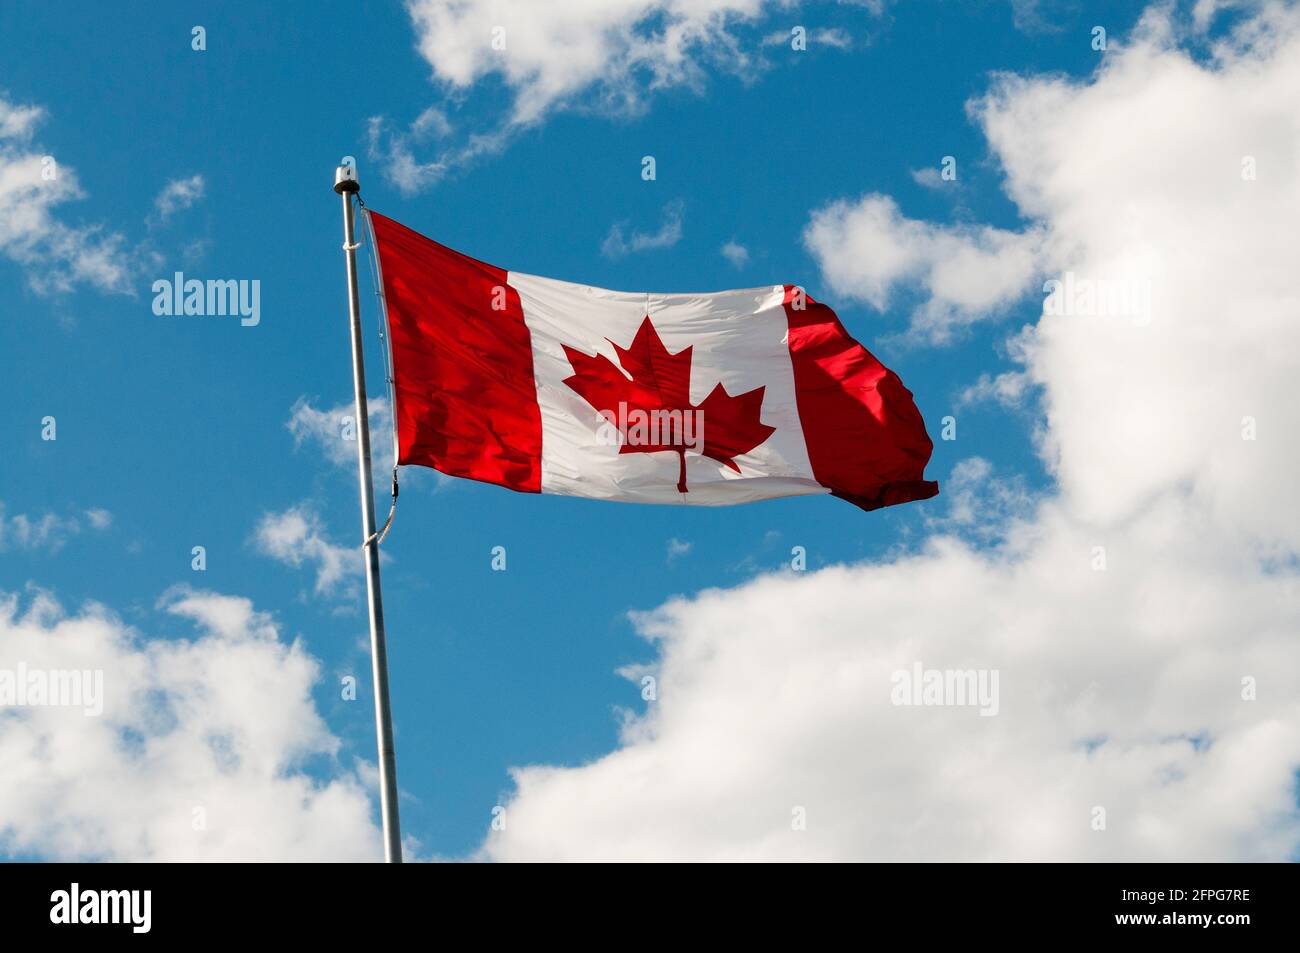 The Canadian flag or Maple Leaf flying against a blue sky with white clouds. Stock Photo